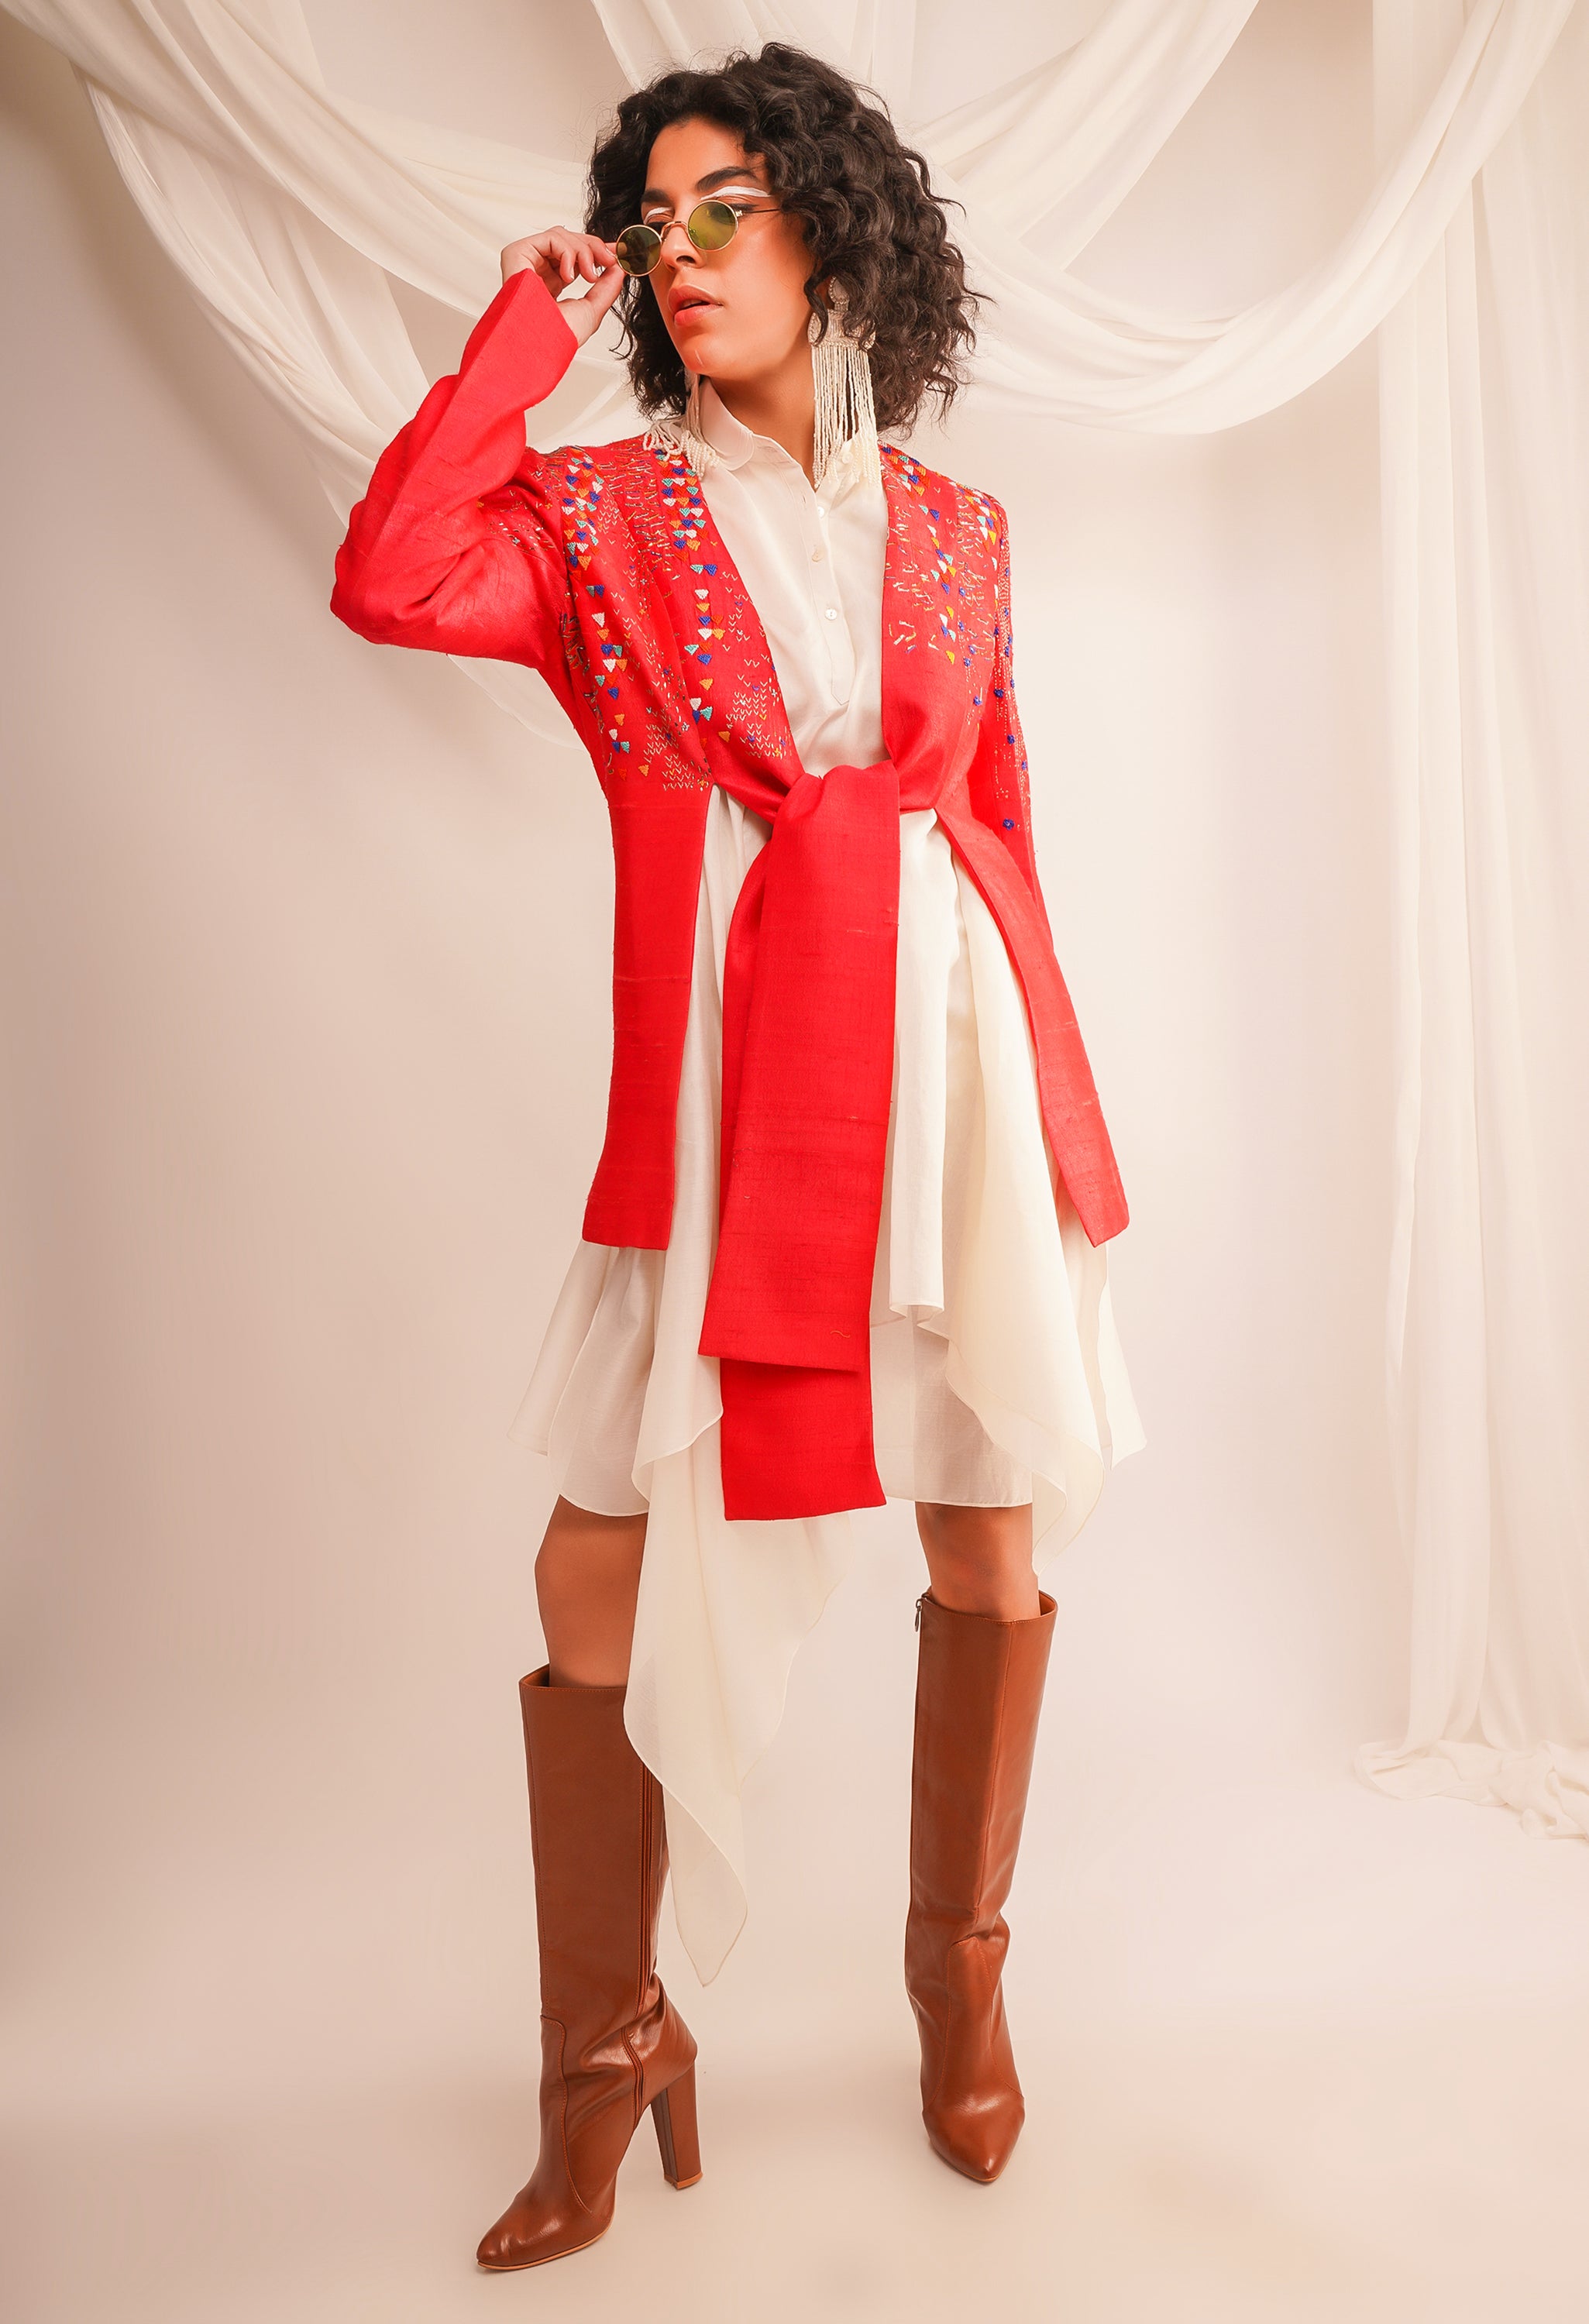 TEXTURED EMROIDERED KNOTTED DUPIAN JACKET WITH ASSYMTRICAL CHANDERI SHIRT AND PANTS